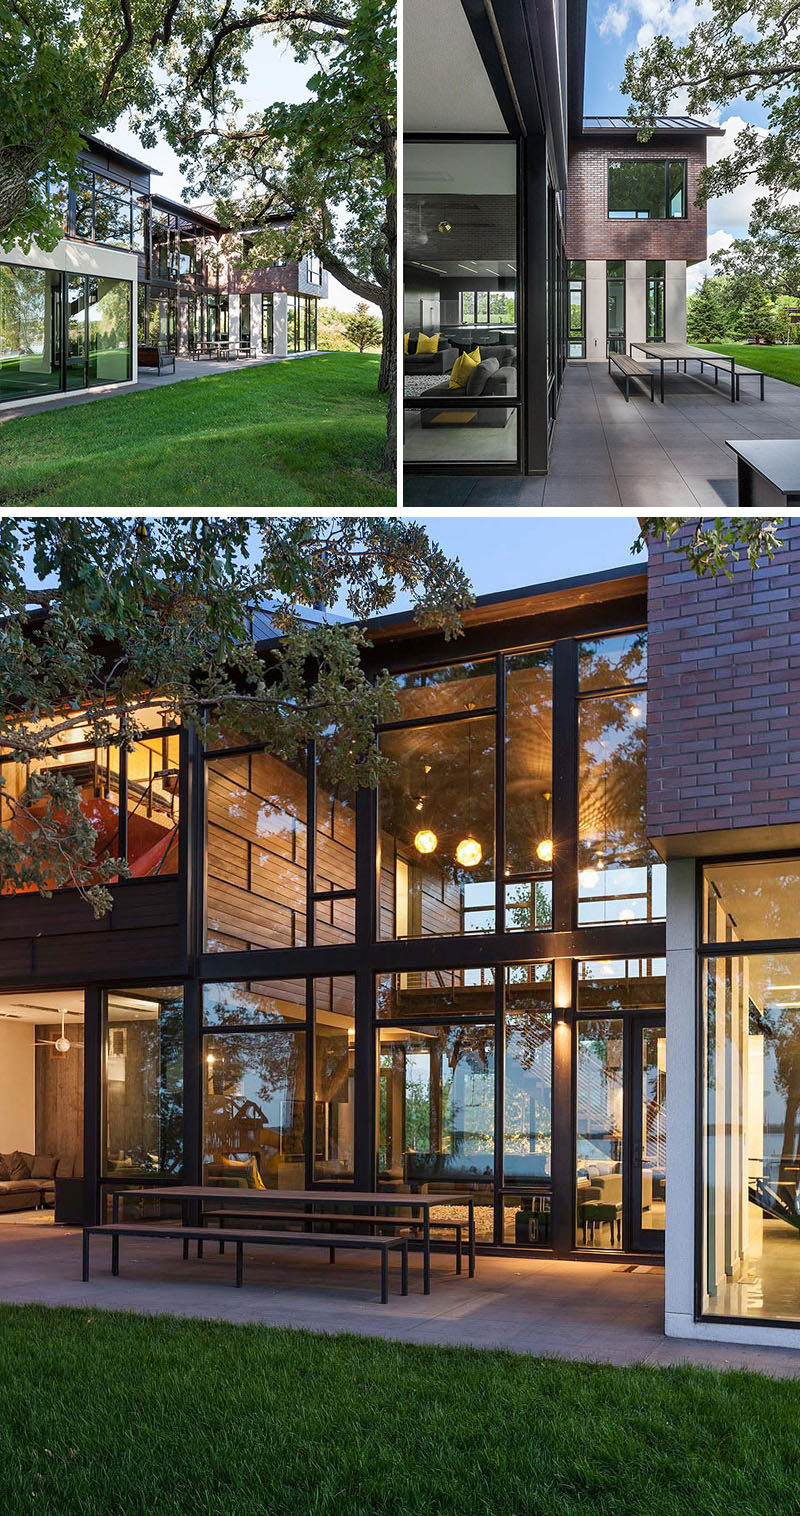 This industrial modern house has been designed to promote the outdoors and active lifestyle of the family, and the interior of the house opens up to an outdoor dining space and lounge area. #IndustrialModern #OutdoorDining #Windows